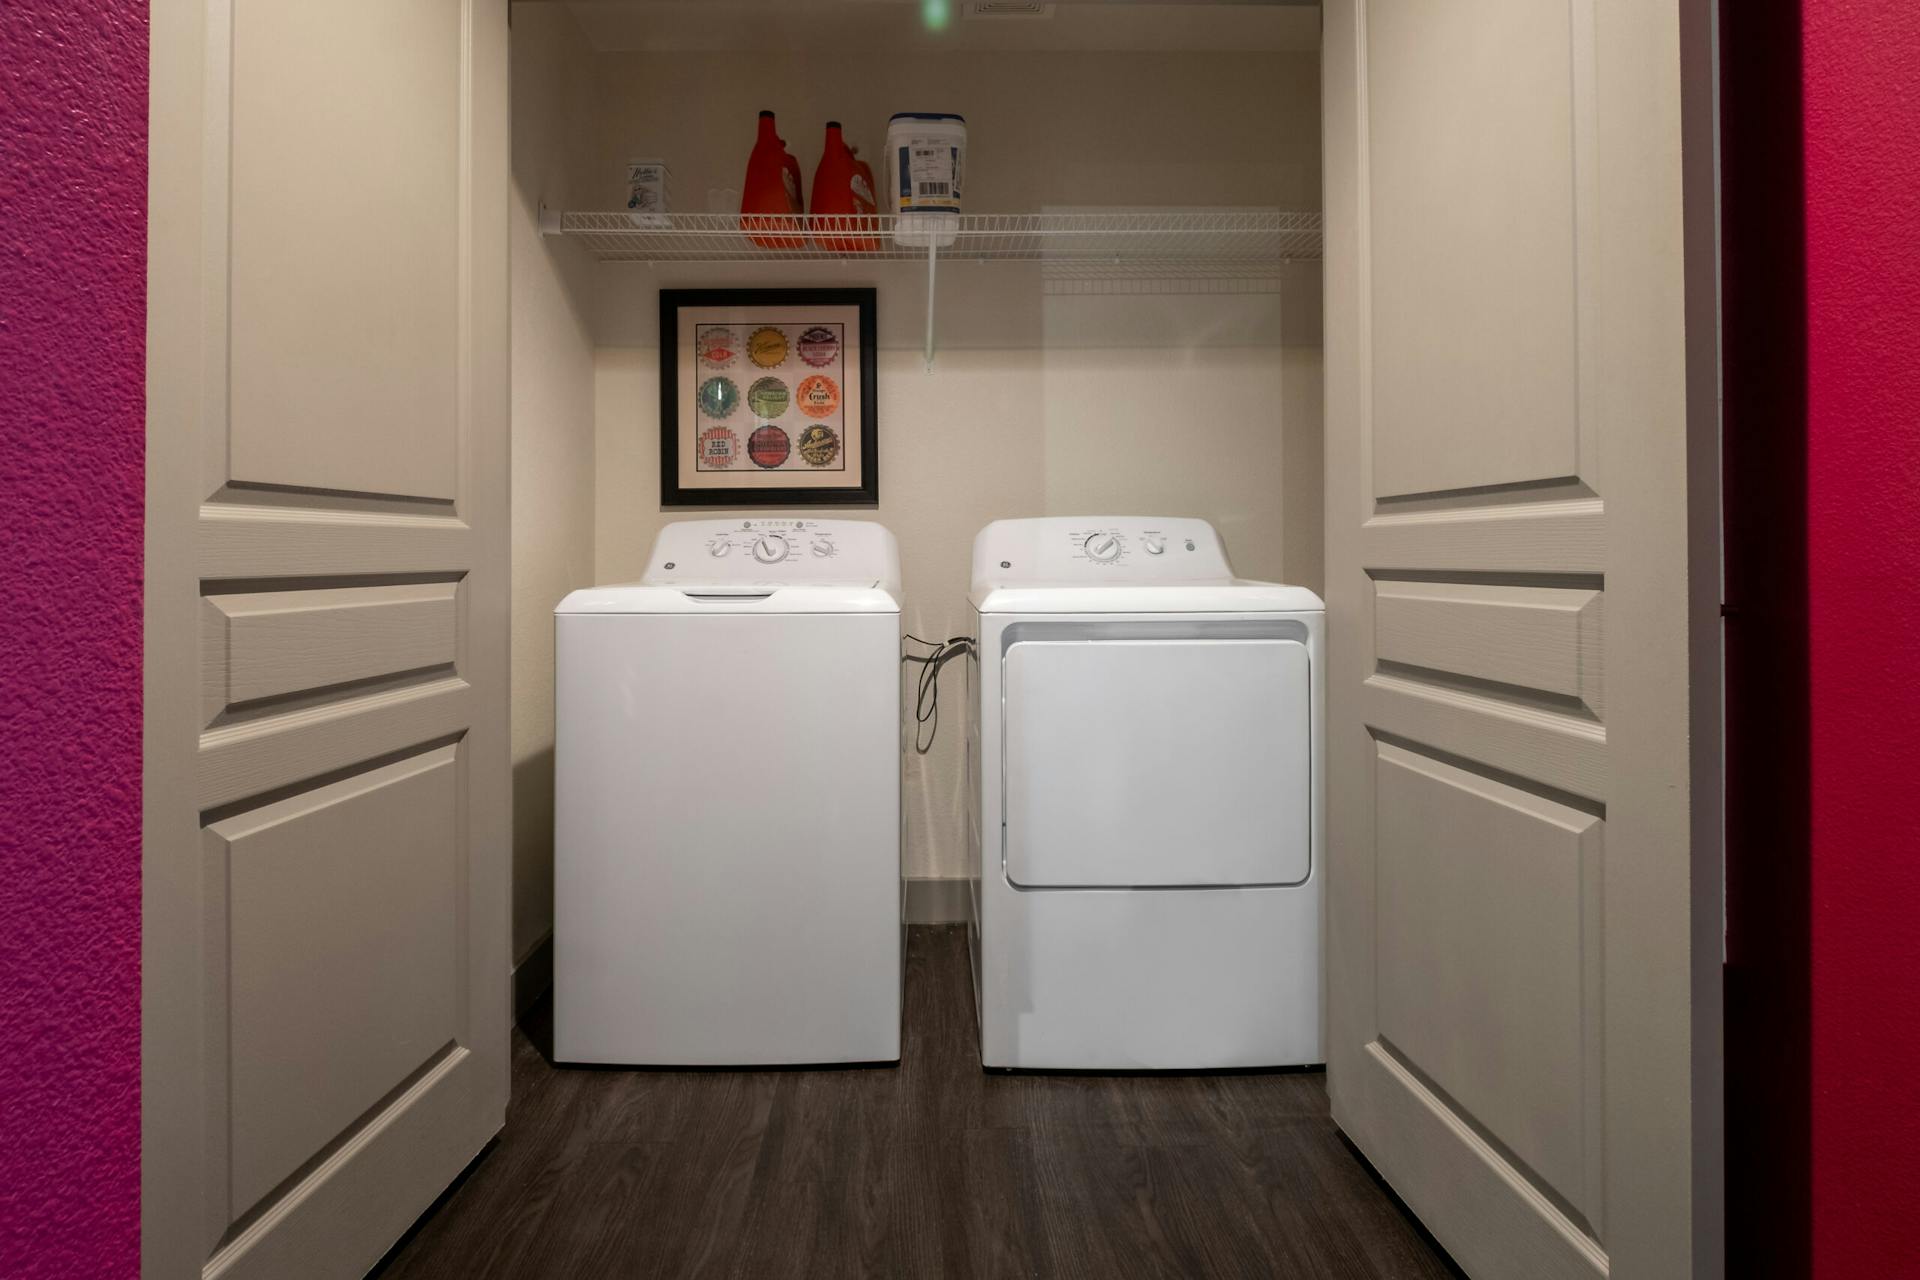 Elysian living washer & dryer in closet